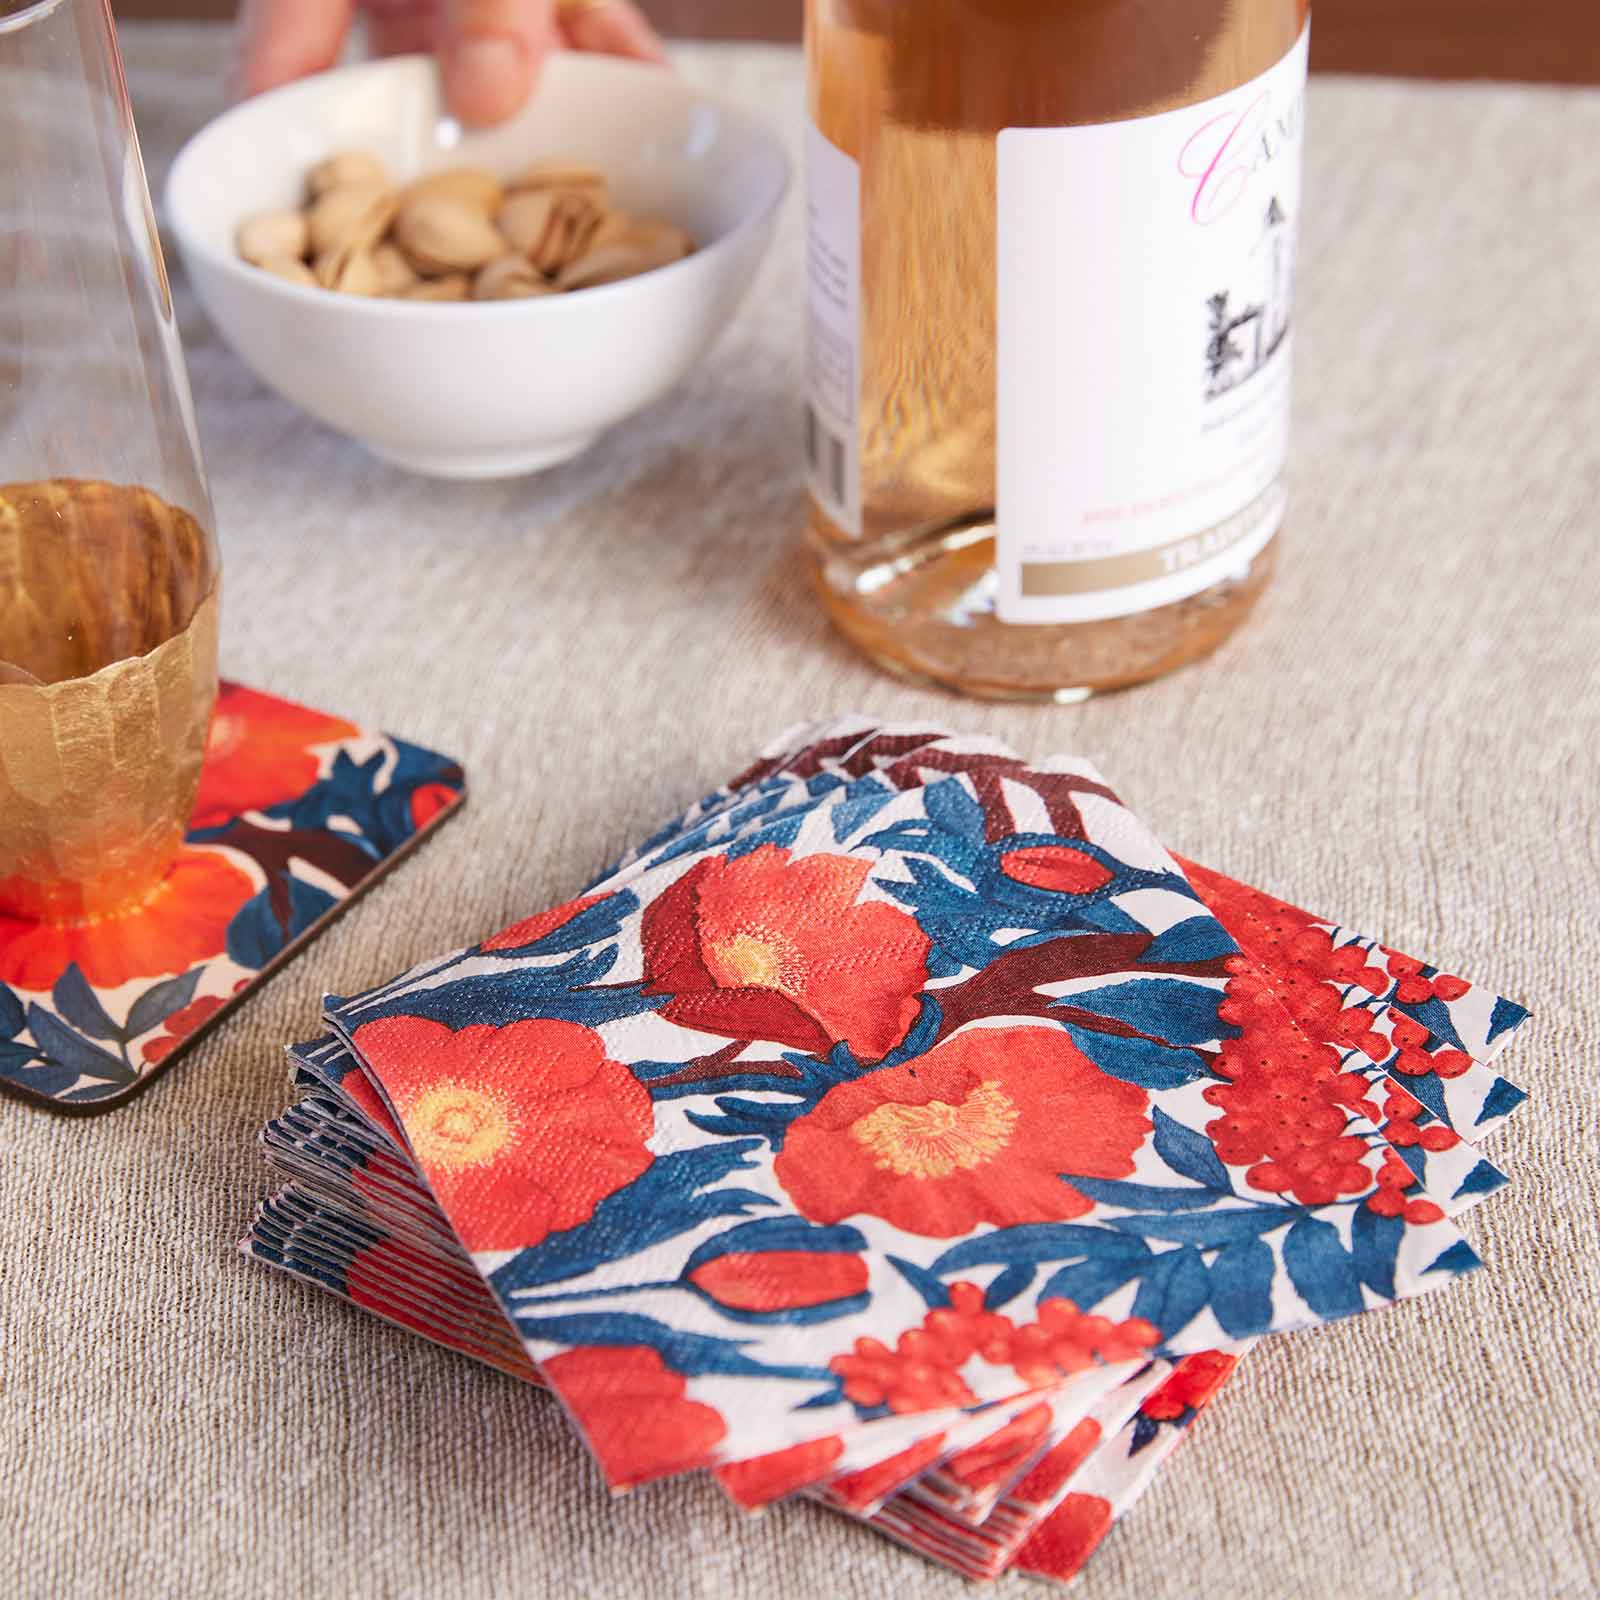 Icelandic Poppies Paper Cocktail Napkins (Pack of 20) Paper Cocktail Napkin - rockflowerpaper